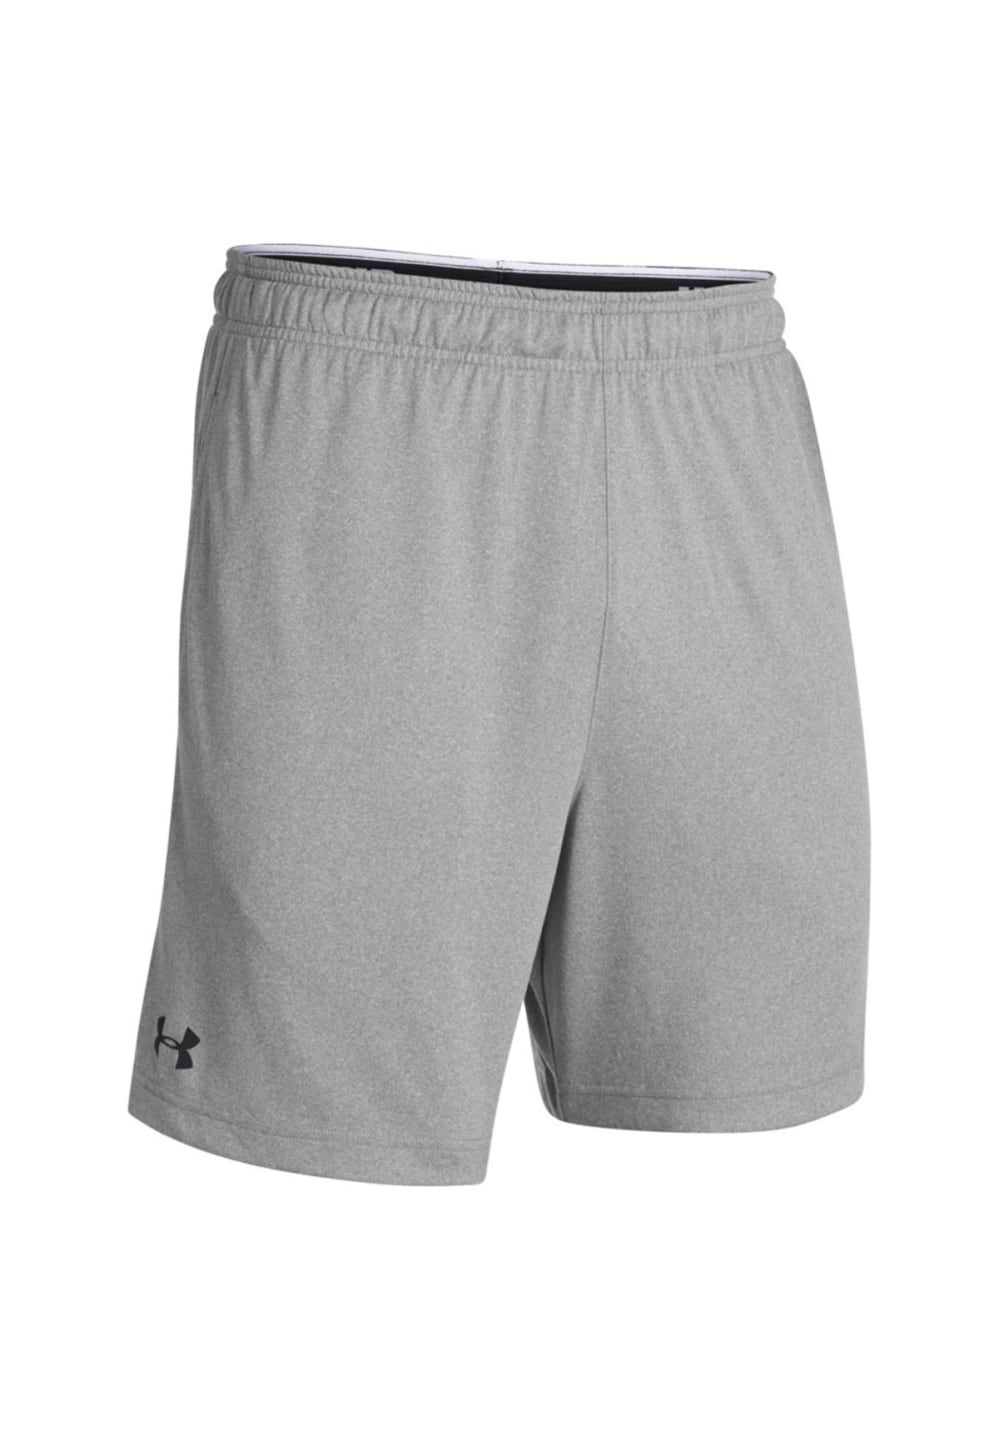 white under armour shorts